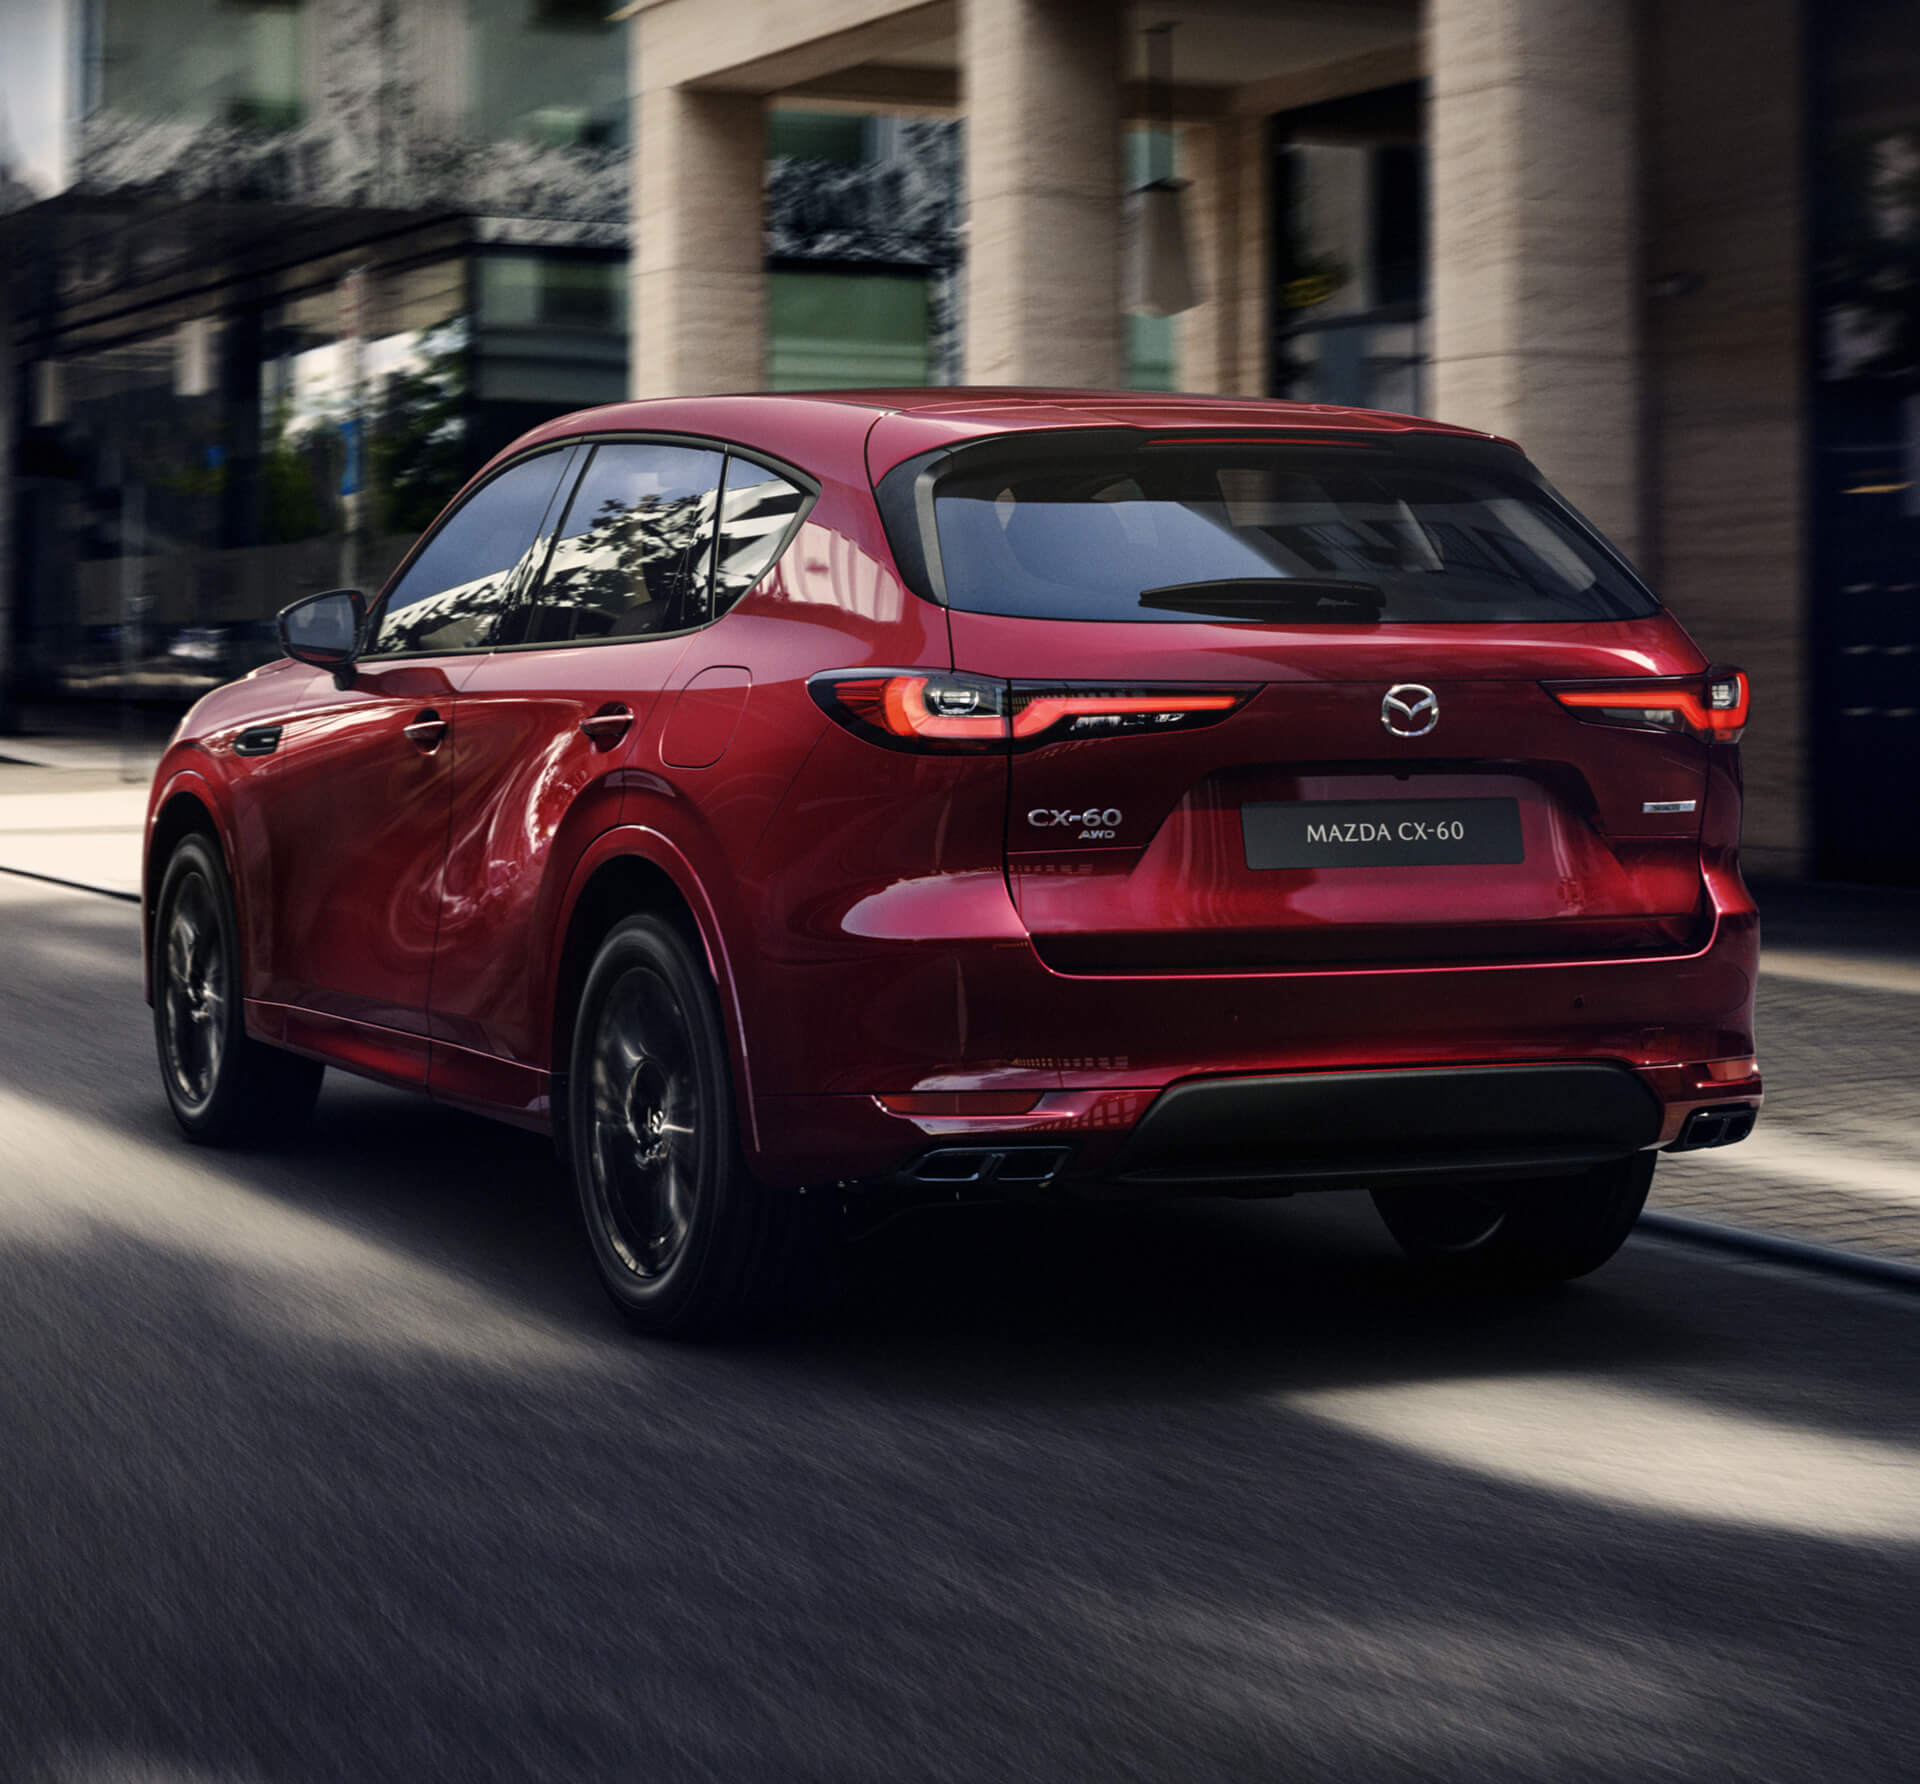 The all-new Mazda CX-60 Plug-In Hybrid SUV parked in front of a city building shown from the rear.